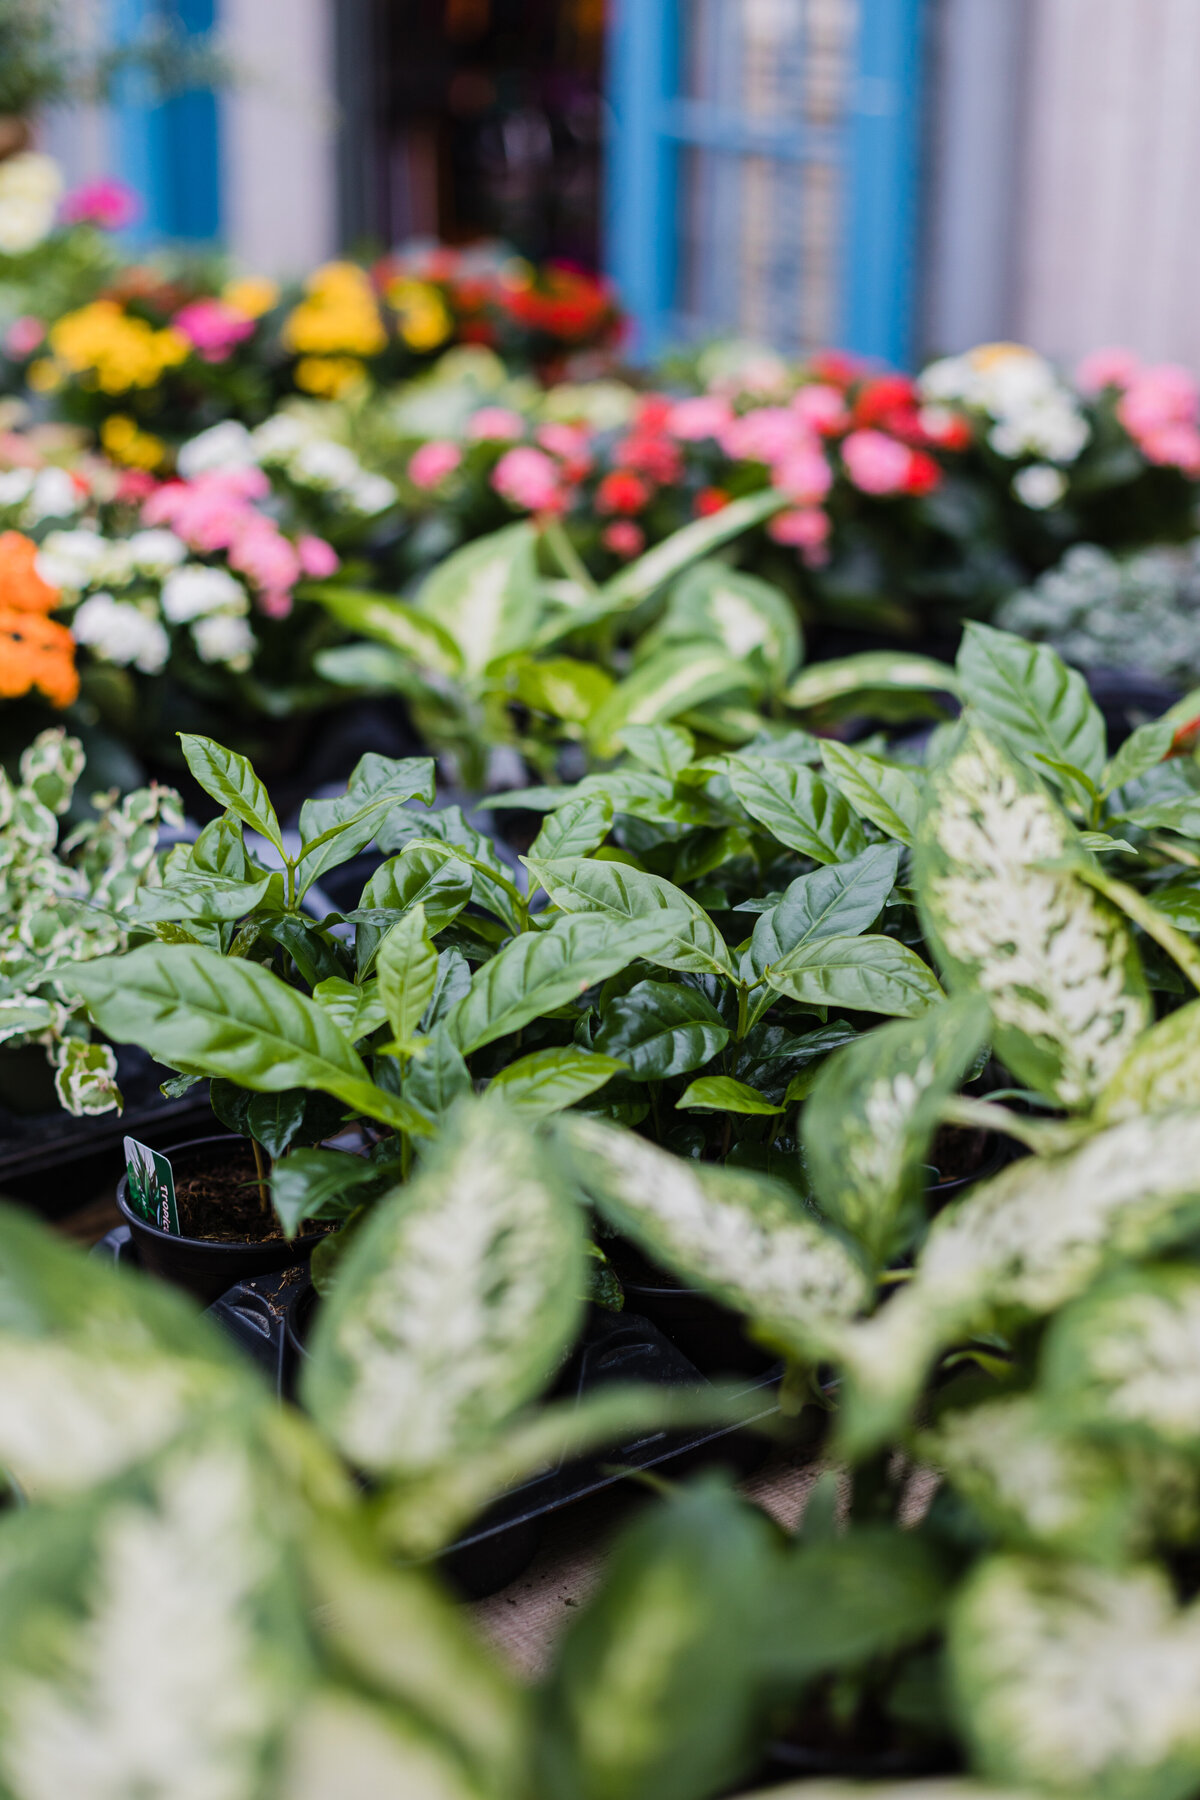 Pete's Greenhouse in Amarillo, Texas will provide you with expert information gleaned from decades of hard work and close observation. Not only are we known for growing the most vibrant blooms year after year, our customers come in seeking advice on how to maintain and grow their garden in our unique environment.